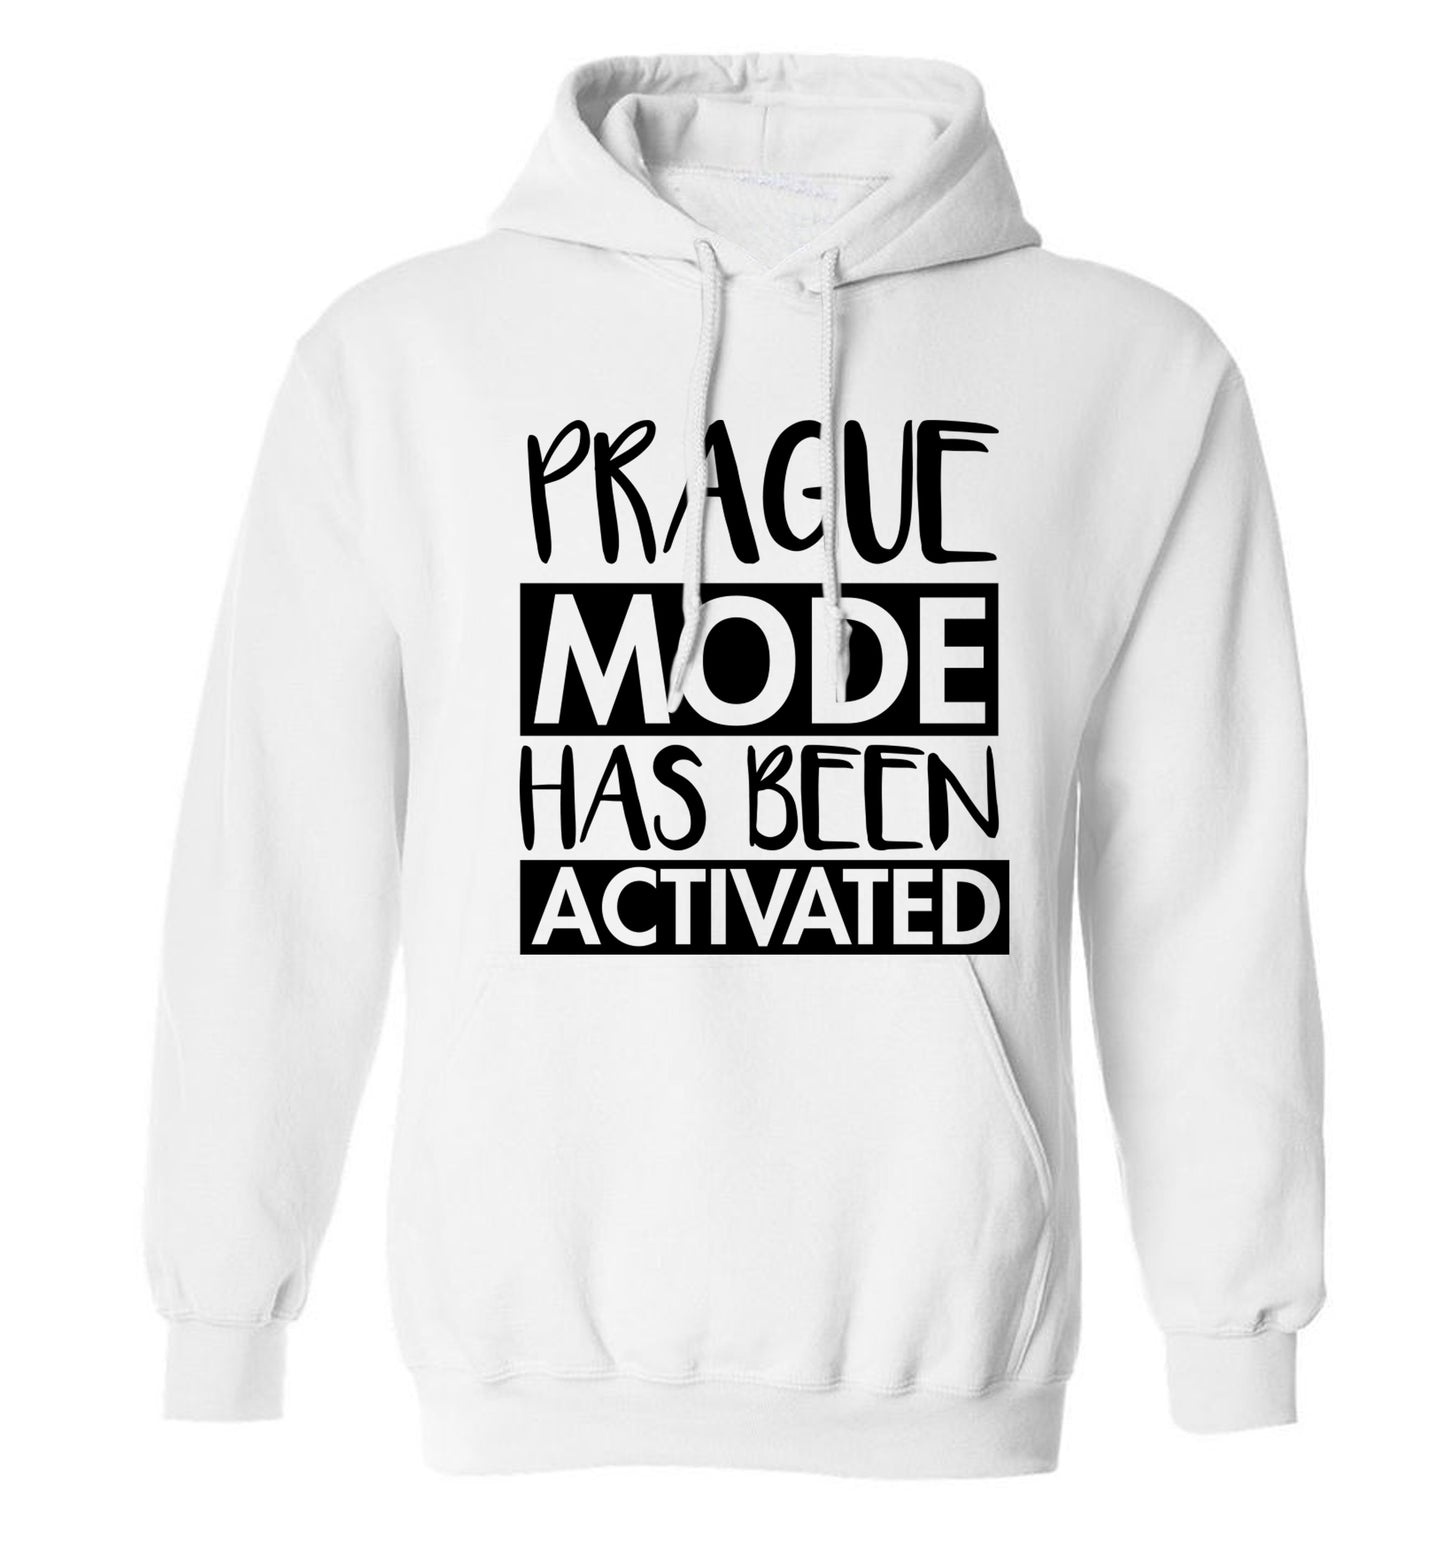 Prague mode has been activated adults unisex white hoodie 2XL